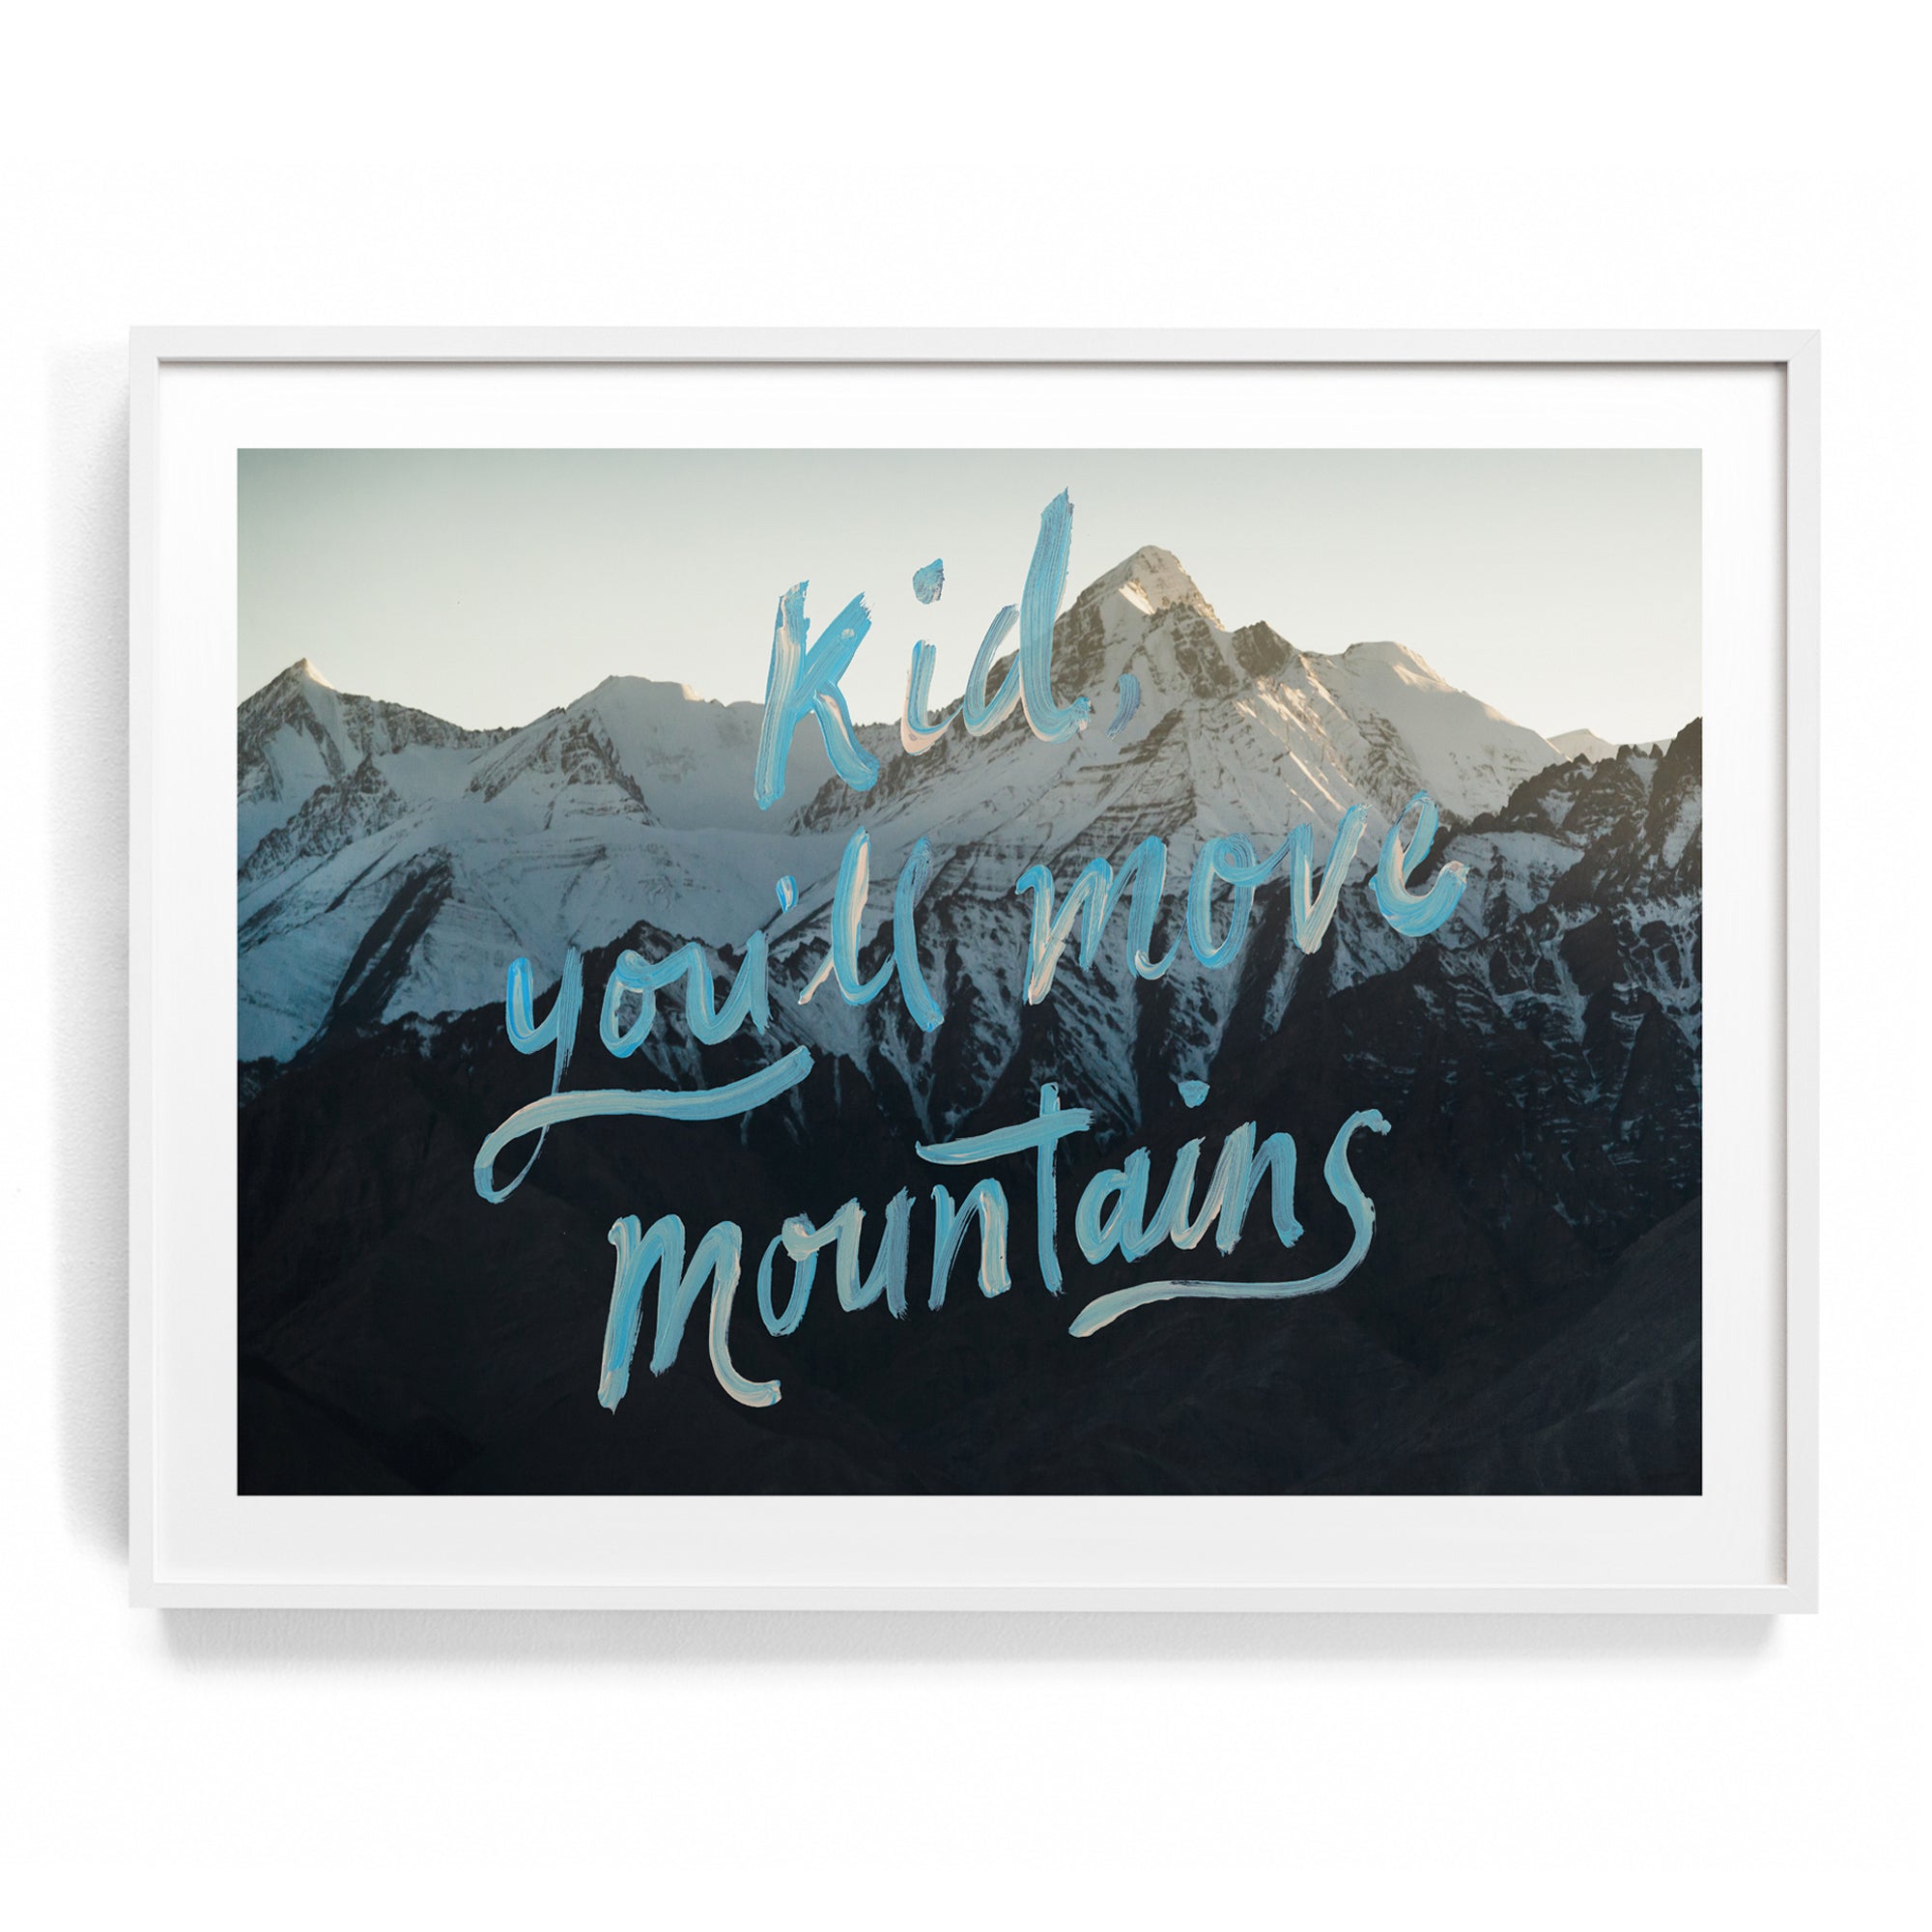 you'll move mountains